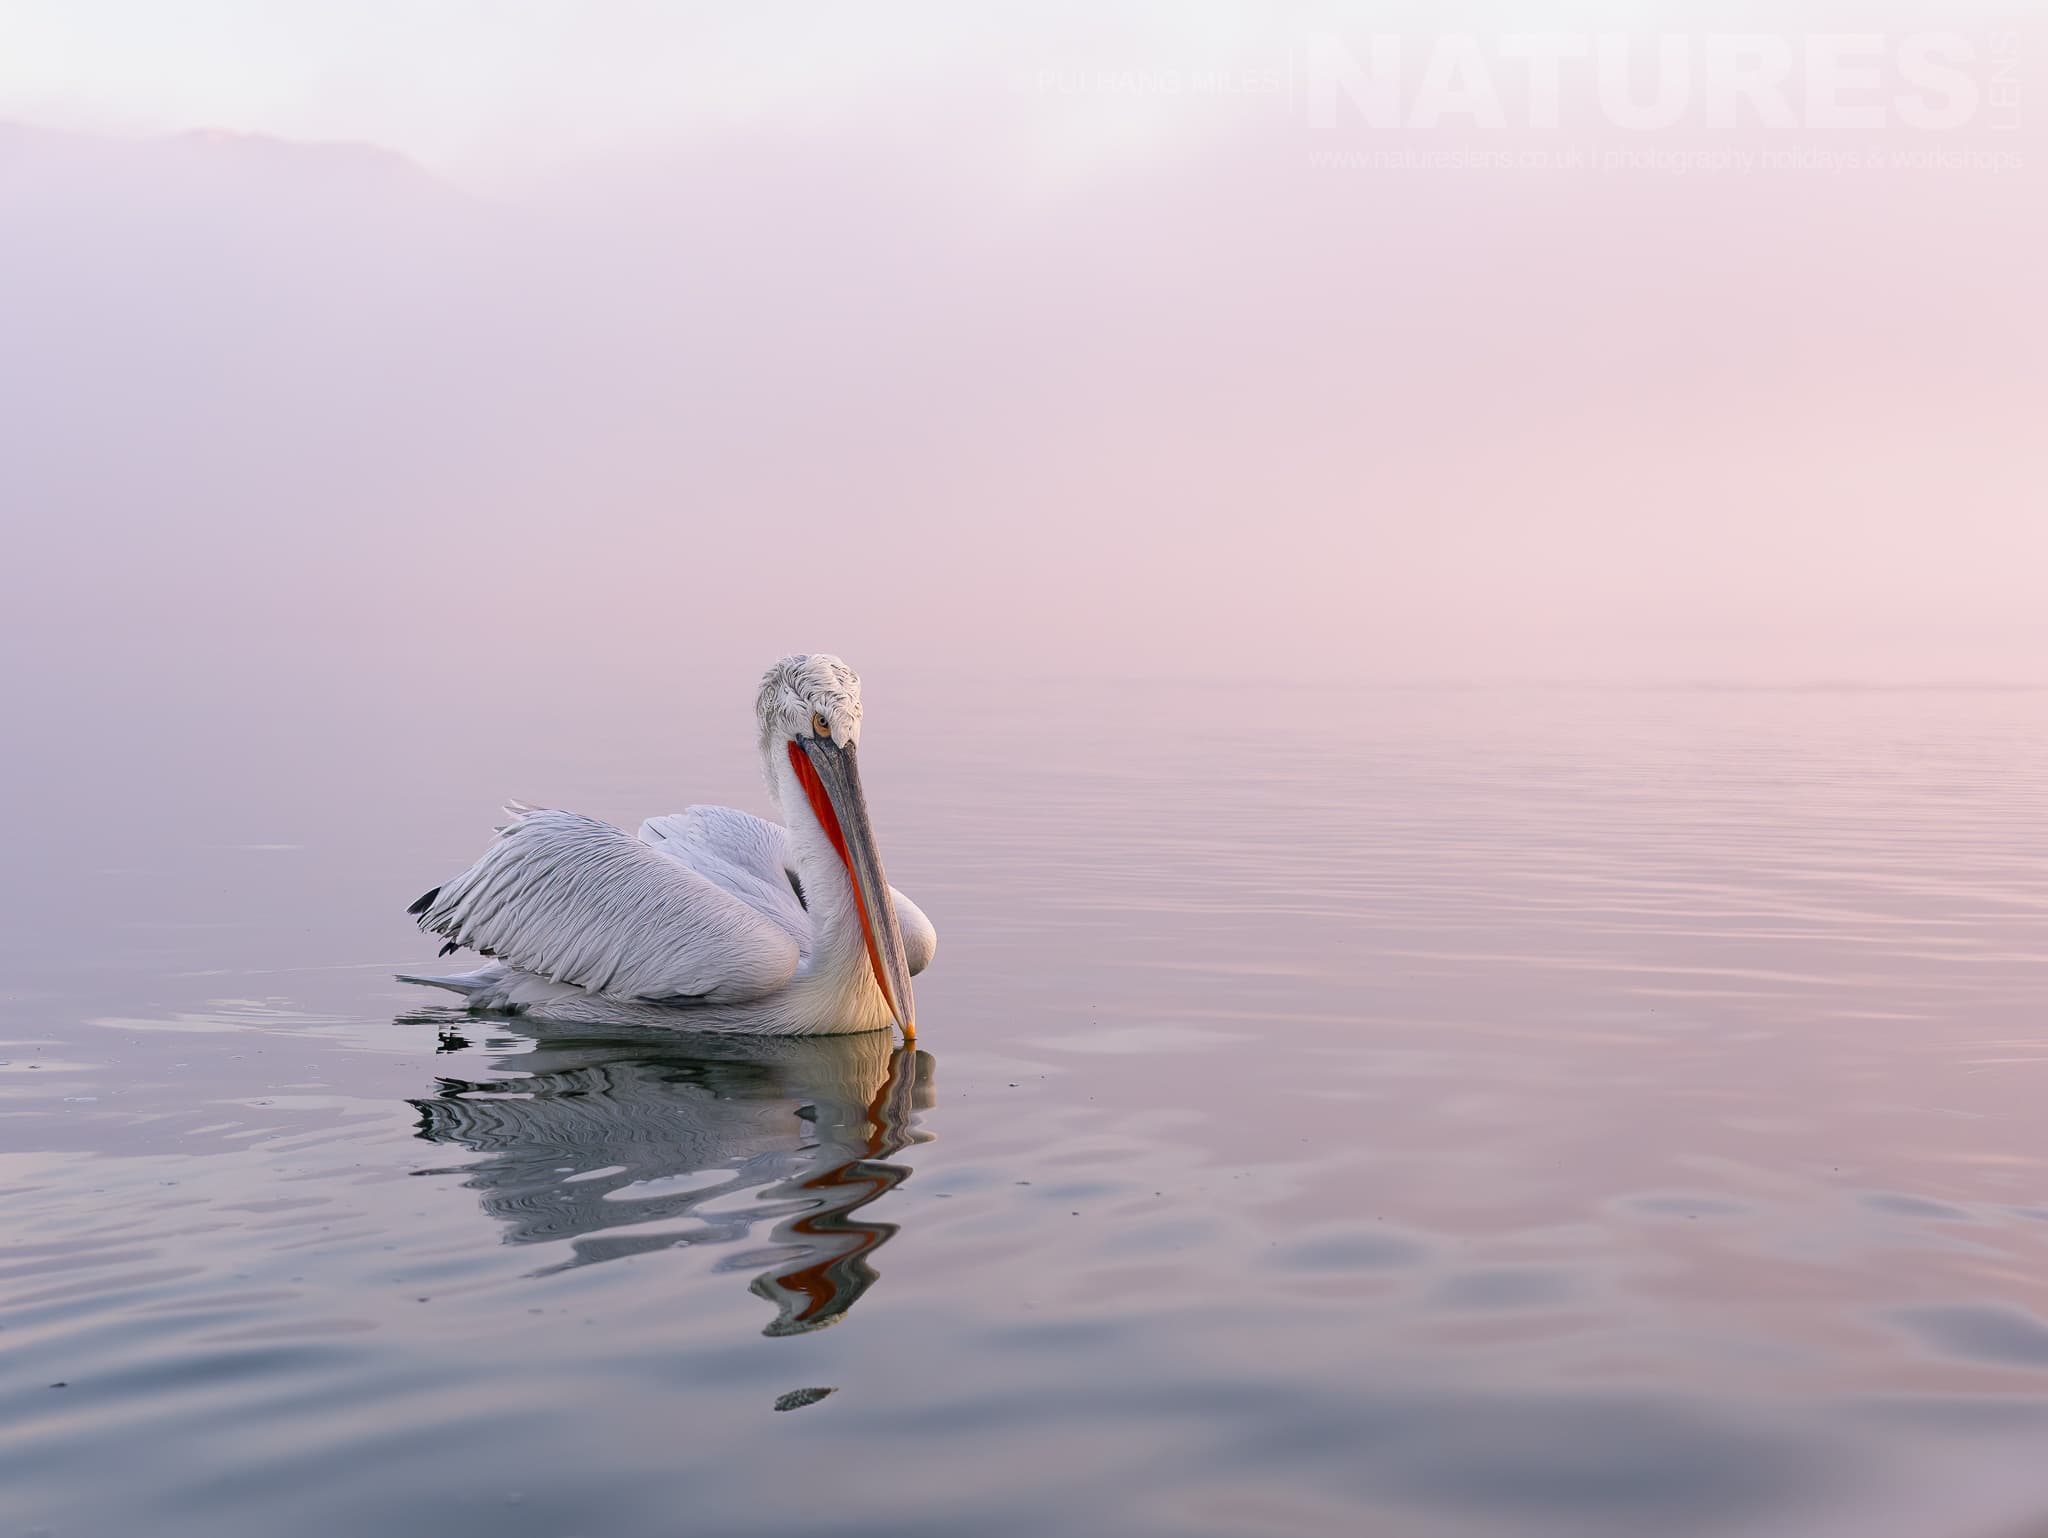 A Lone Pelican Of Lake Kerkini Drift Alongisde The Boat On The Waters Of The Lake Photographed During A Natureslens Pelicans Of Lake Kerkini Photography Holiday